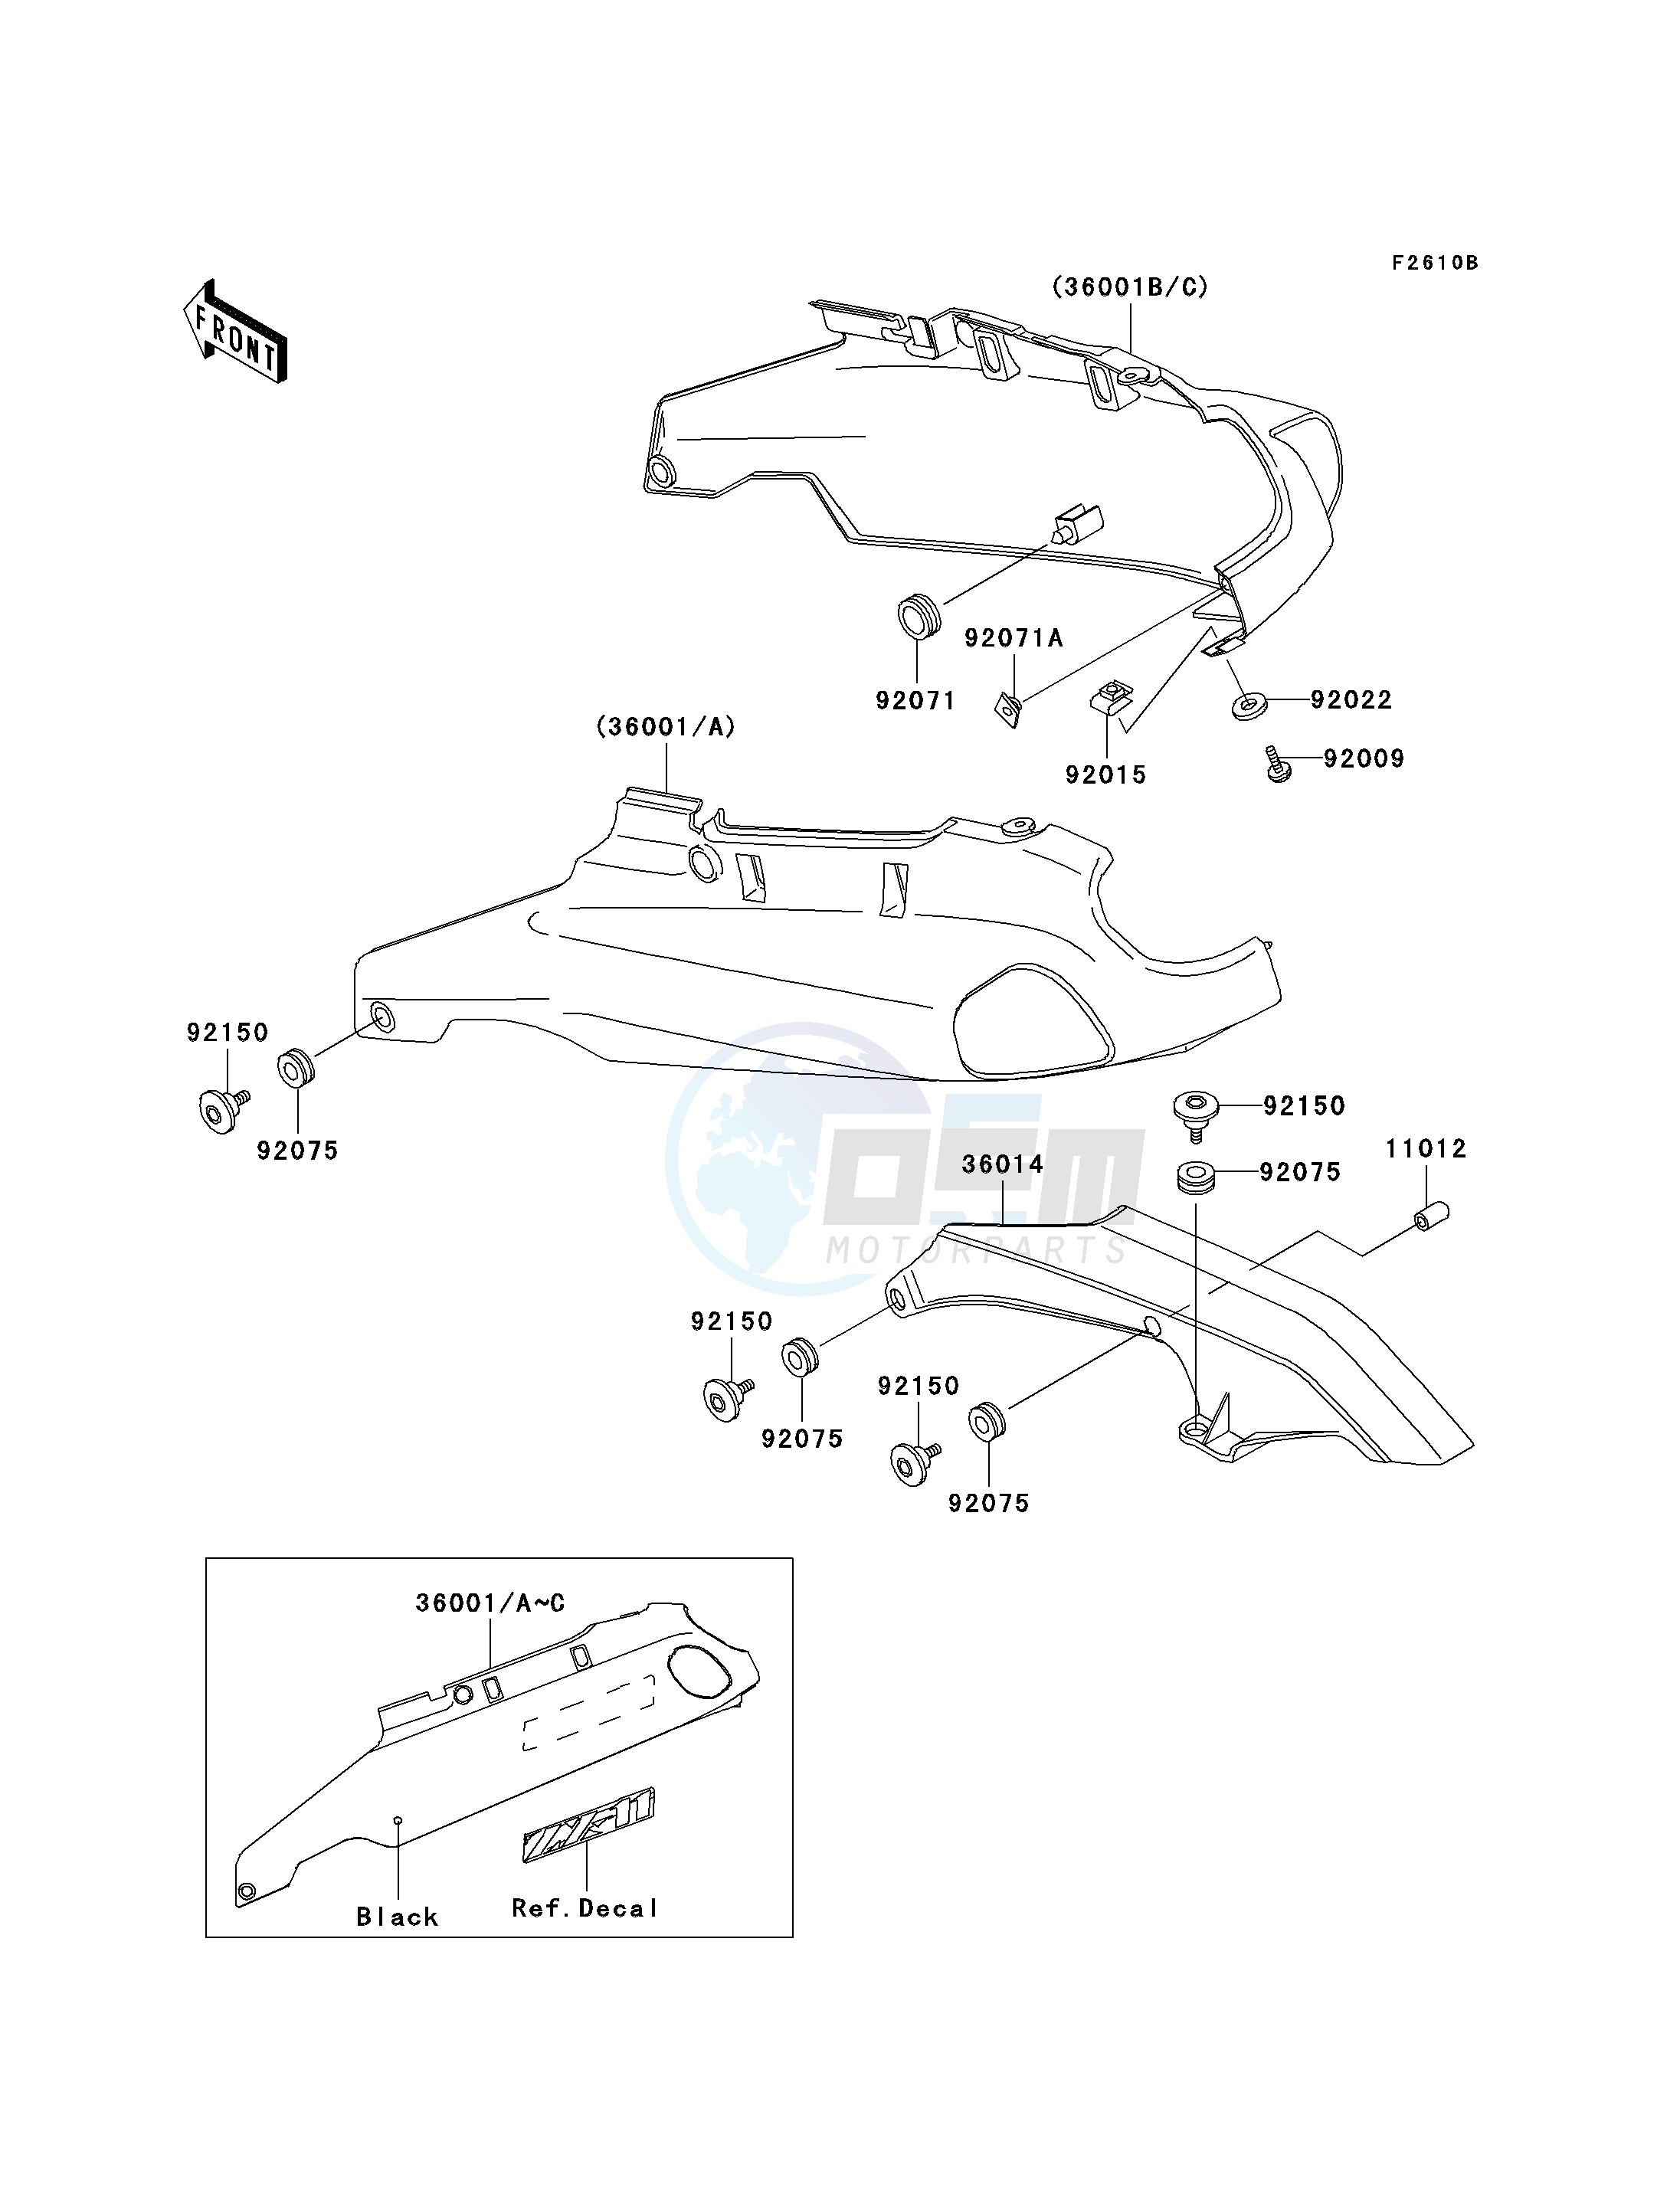 SIDE COVERS_CHAIN COVER-- ZX1100-D3- - blueprint